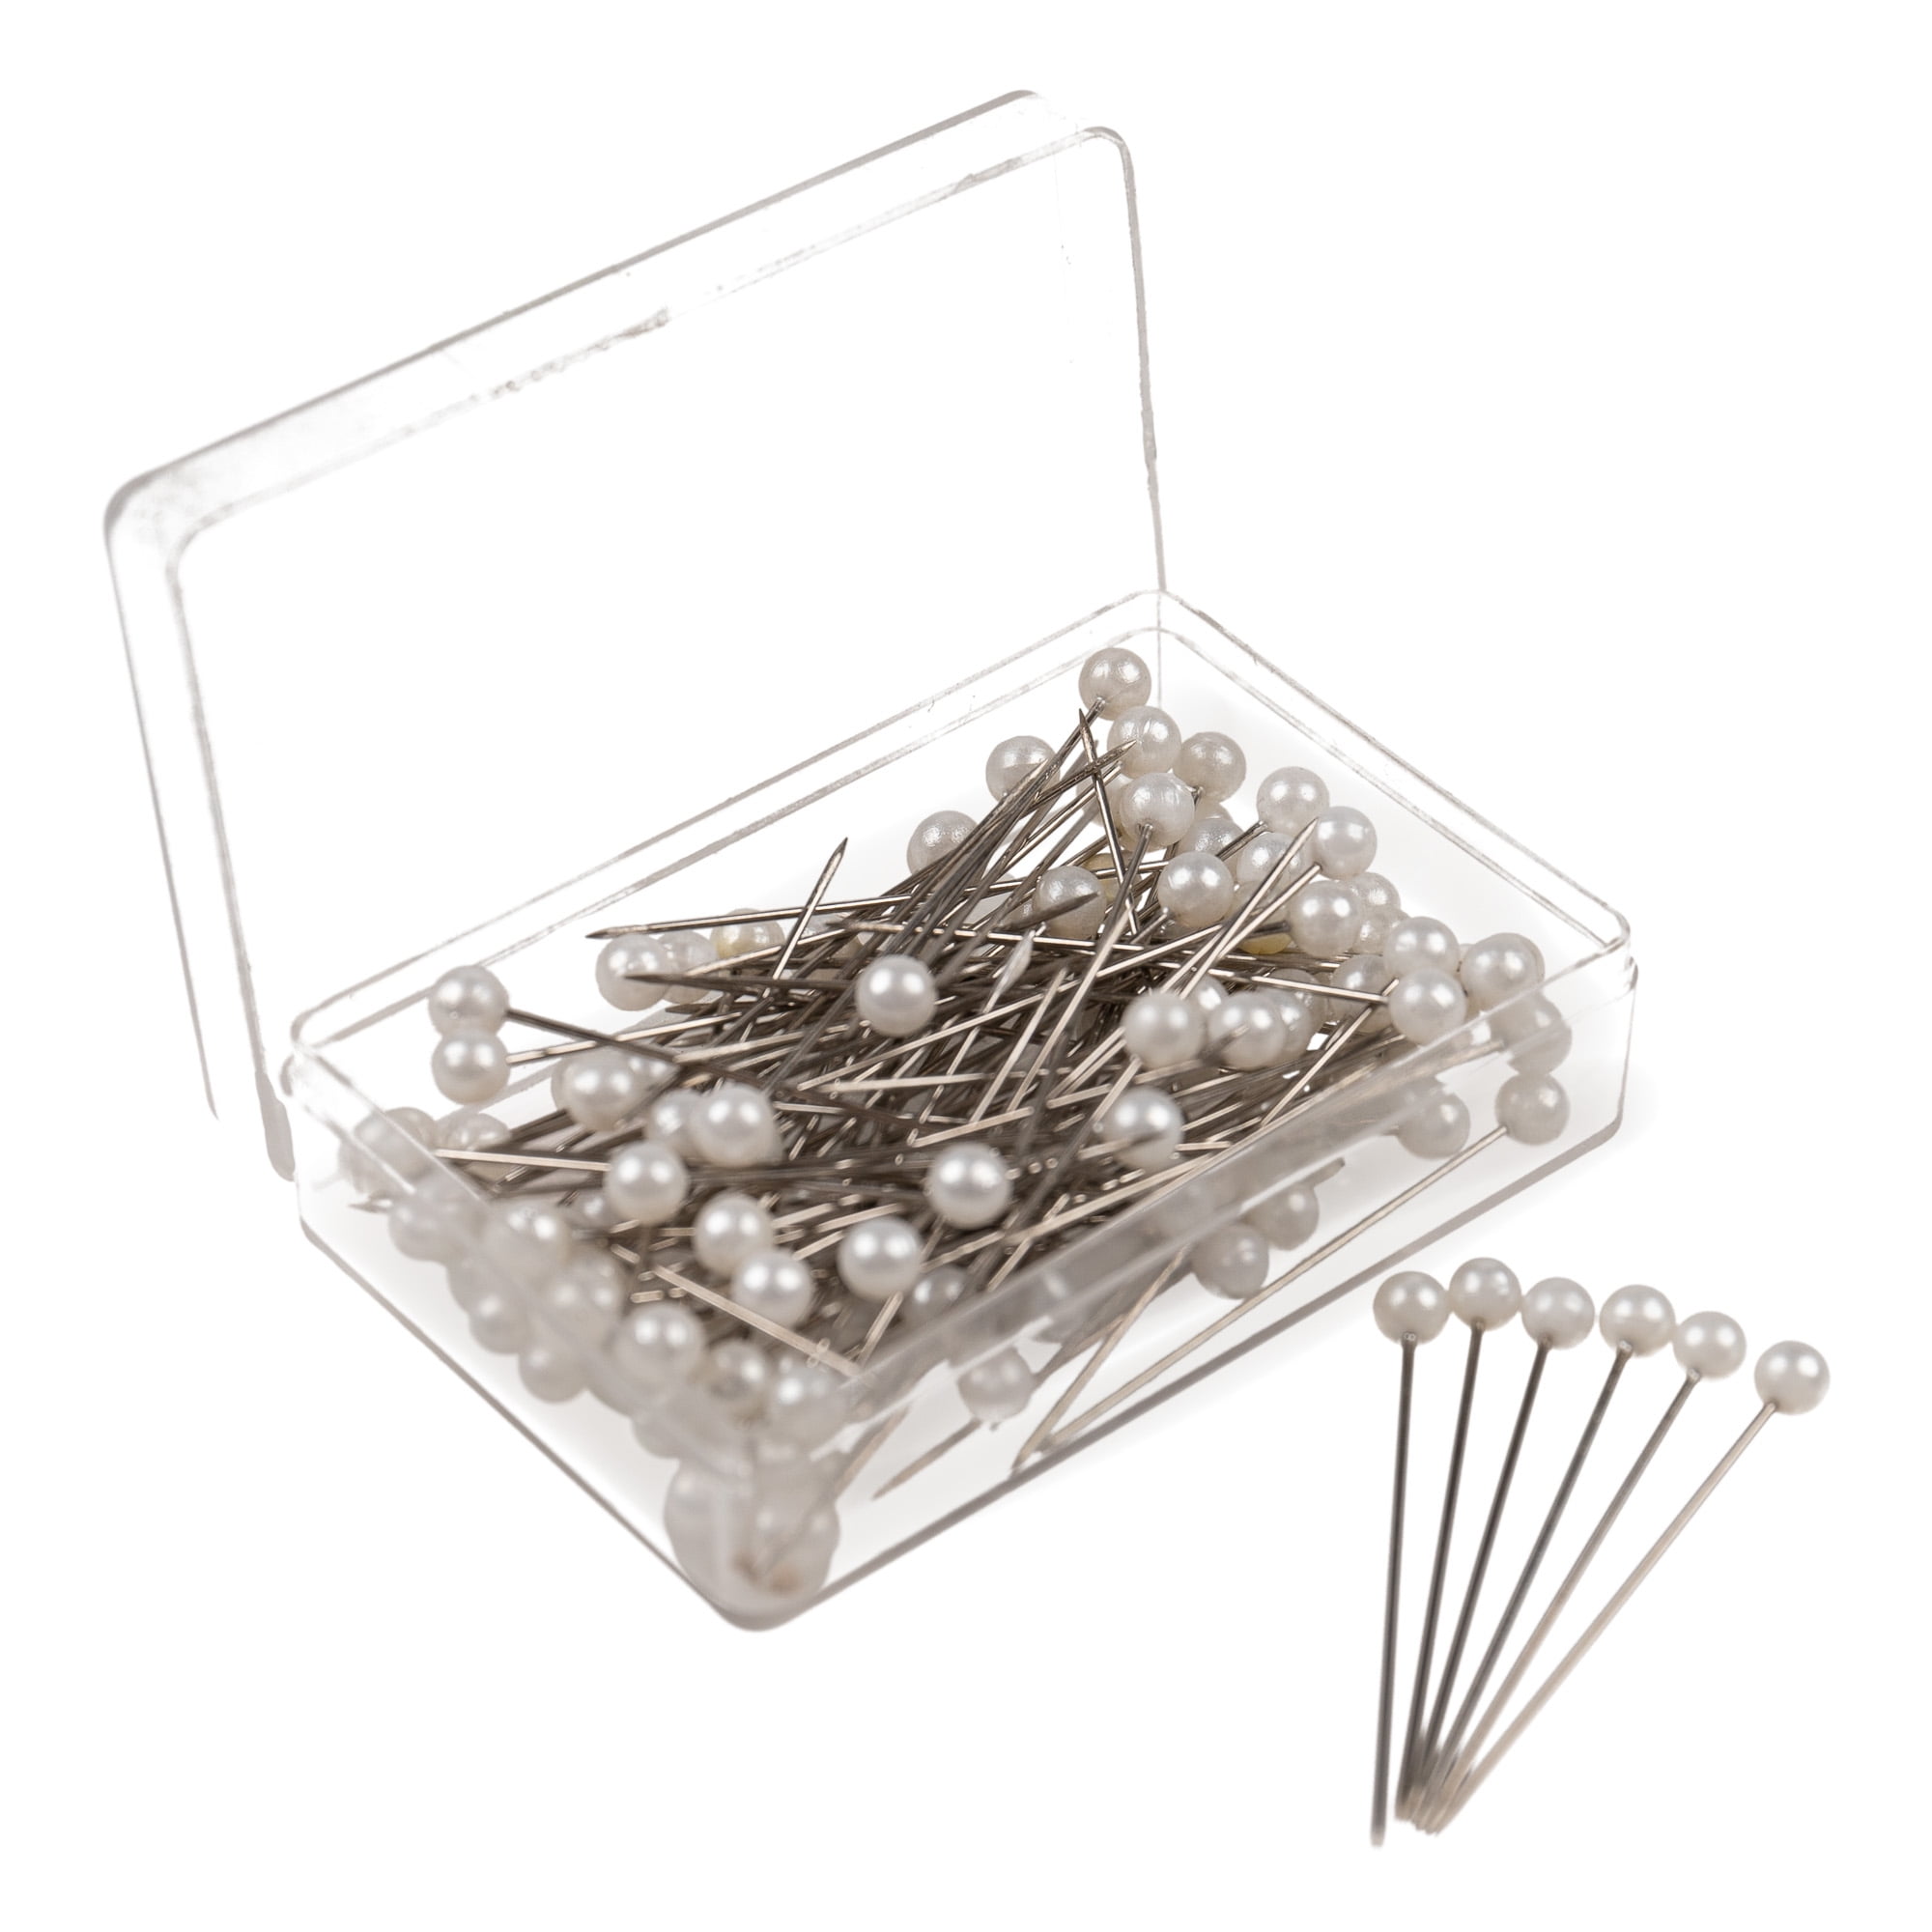 Sewing Pins 500 Pcs Hat Pin, Straight Pins Pin Cushions for Sewing Pearl  Head Sewing Pins, Straight Pins with Large Heads Pearlized Pins Dressmaking